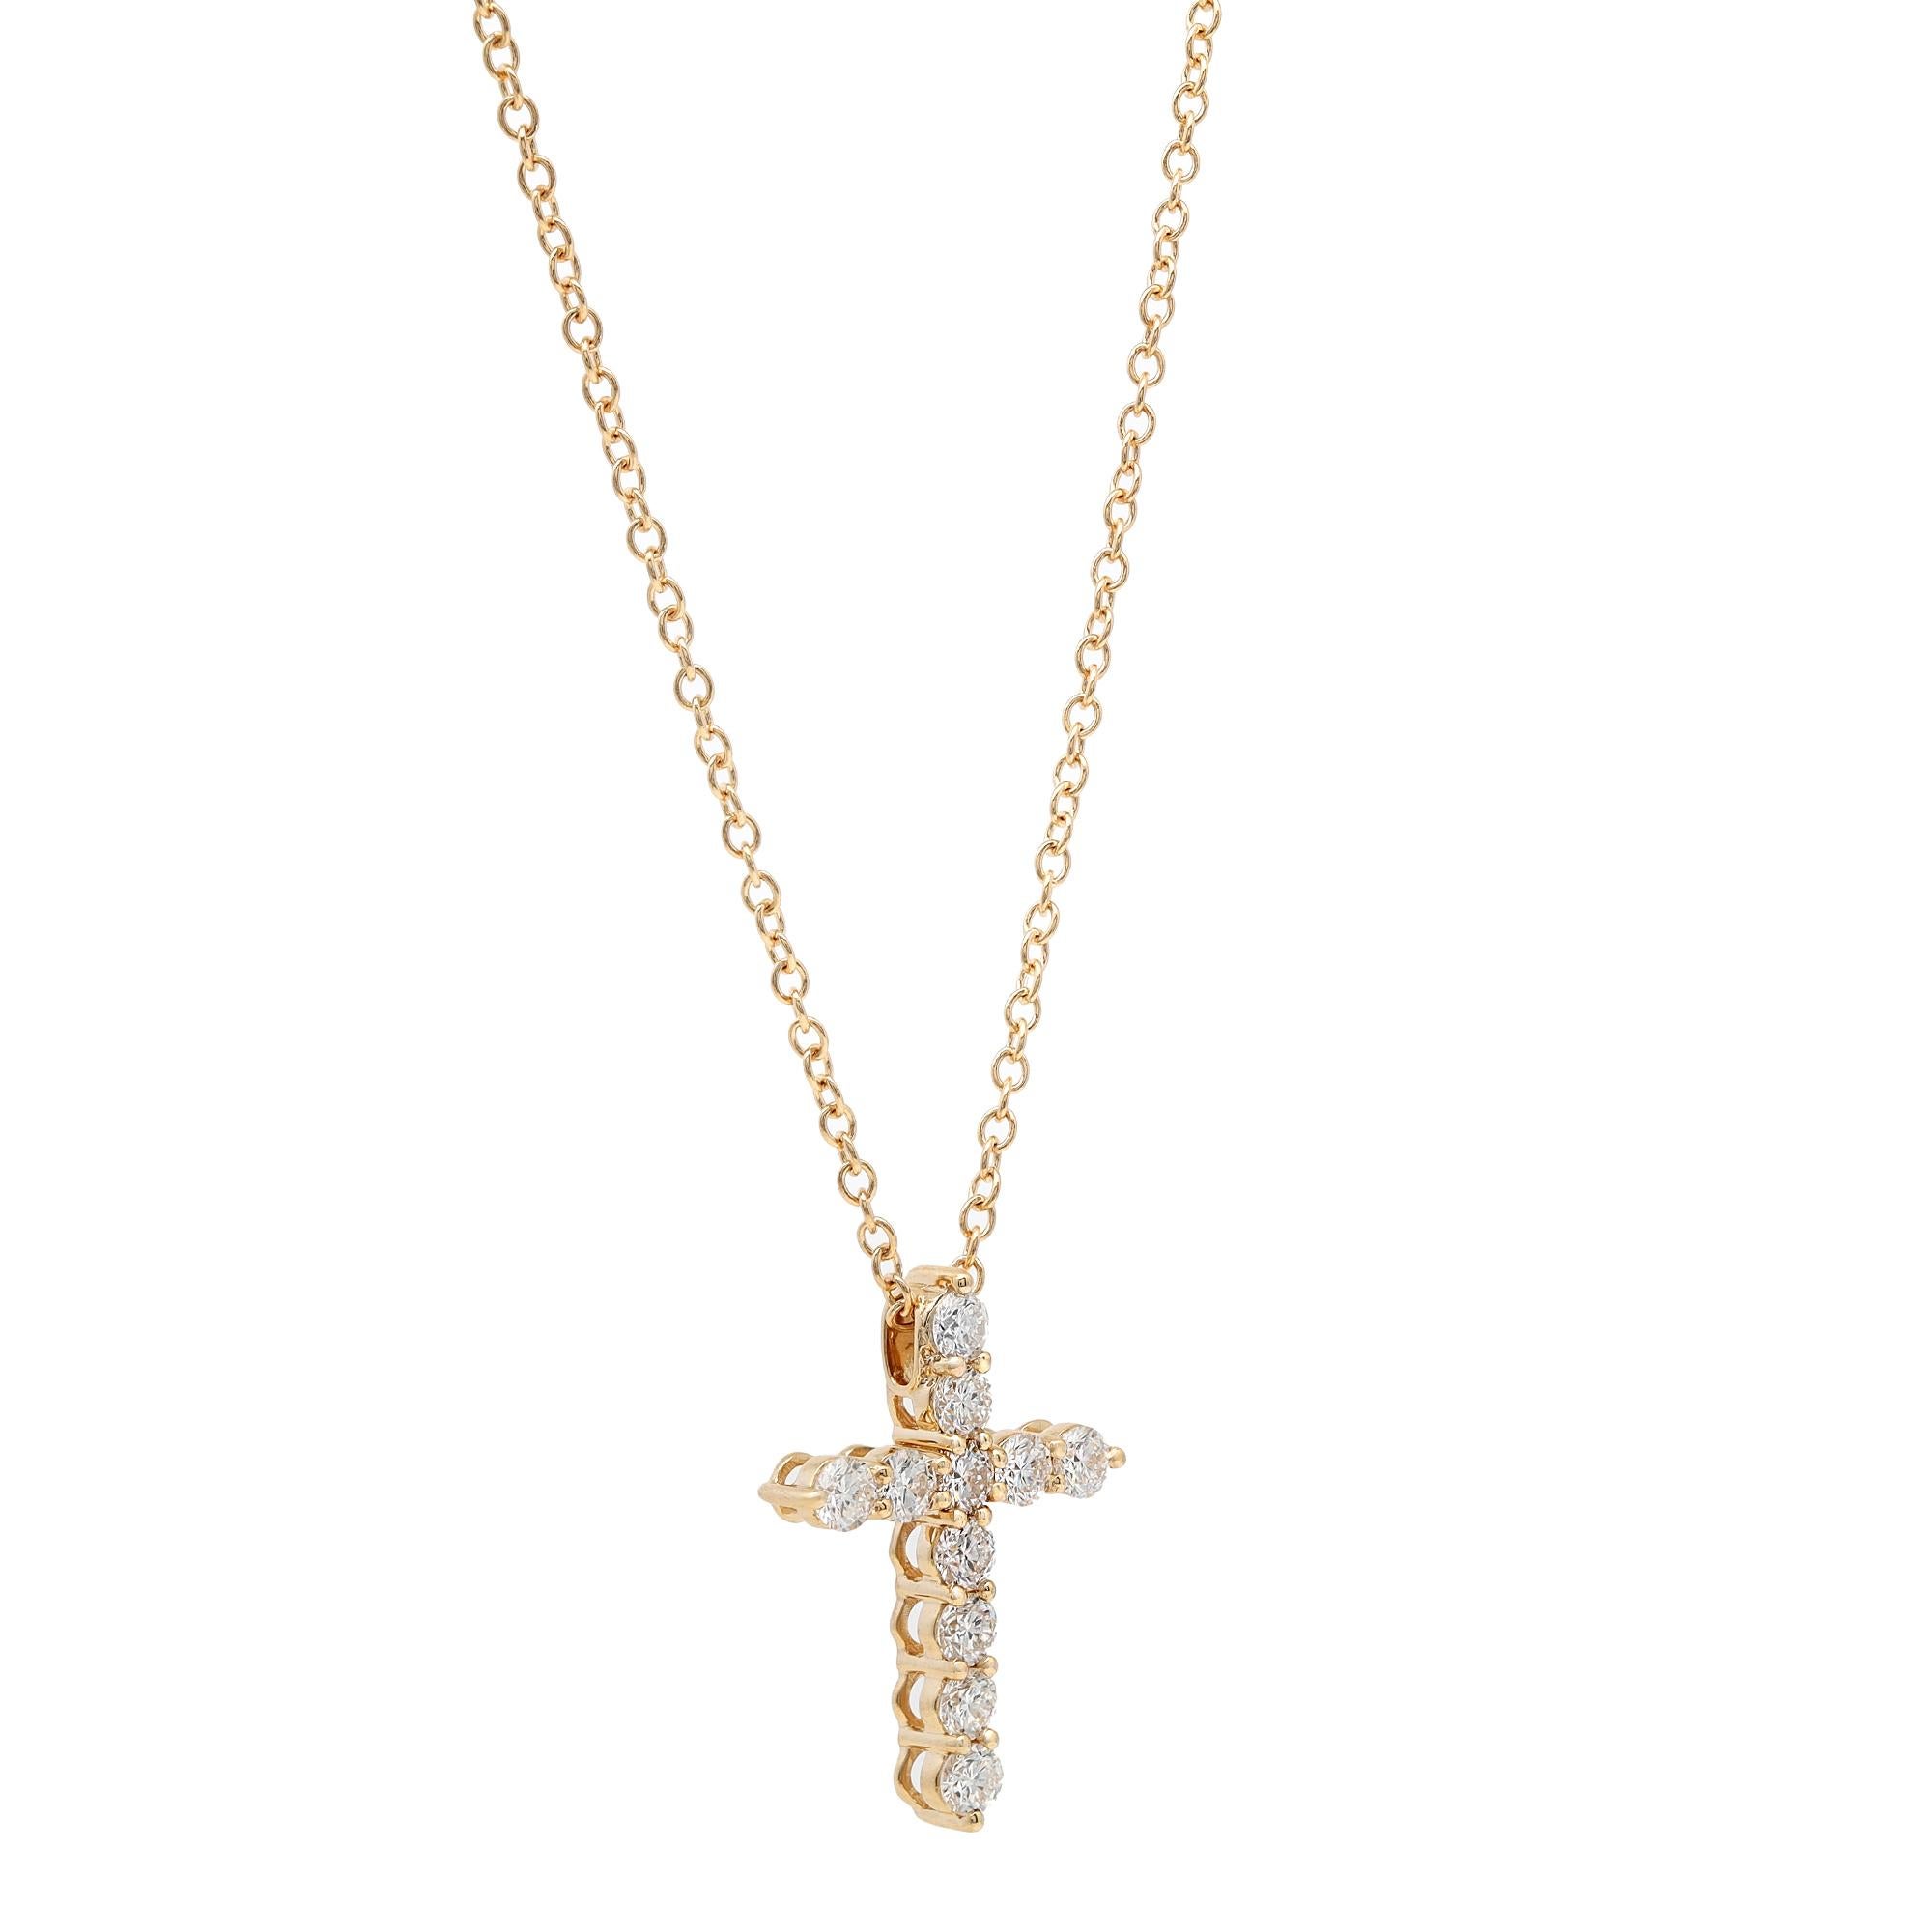 This gorgeous 18K yellow gold diamond cross pendant features 11 prong set round brilliant cut sparkling diamonds weighing approximately 1.00 carat in total. Diamond quality: G-H color and VS-SI clarity. Pendant size: 21.9mm x 16.2mm. Chain length: